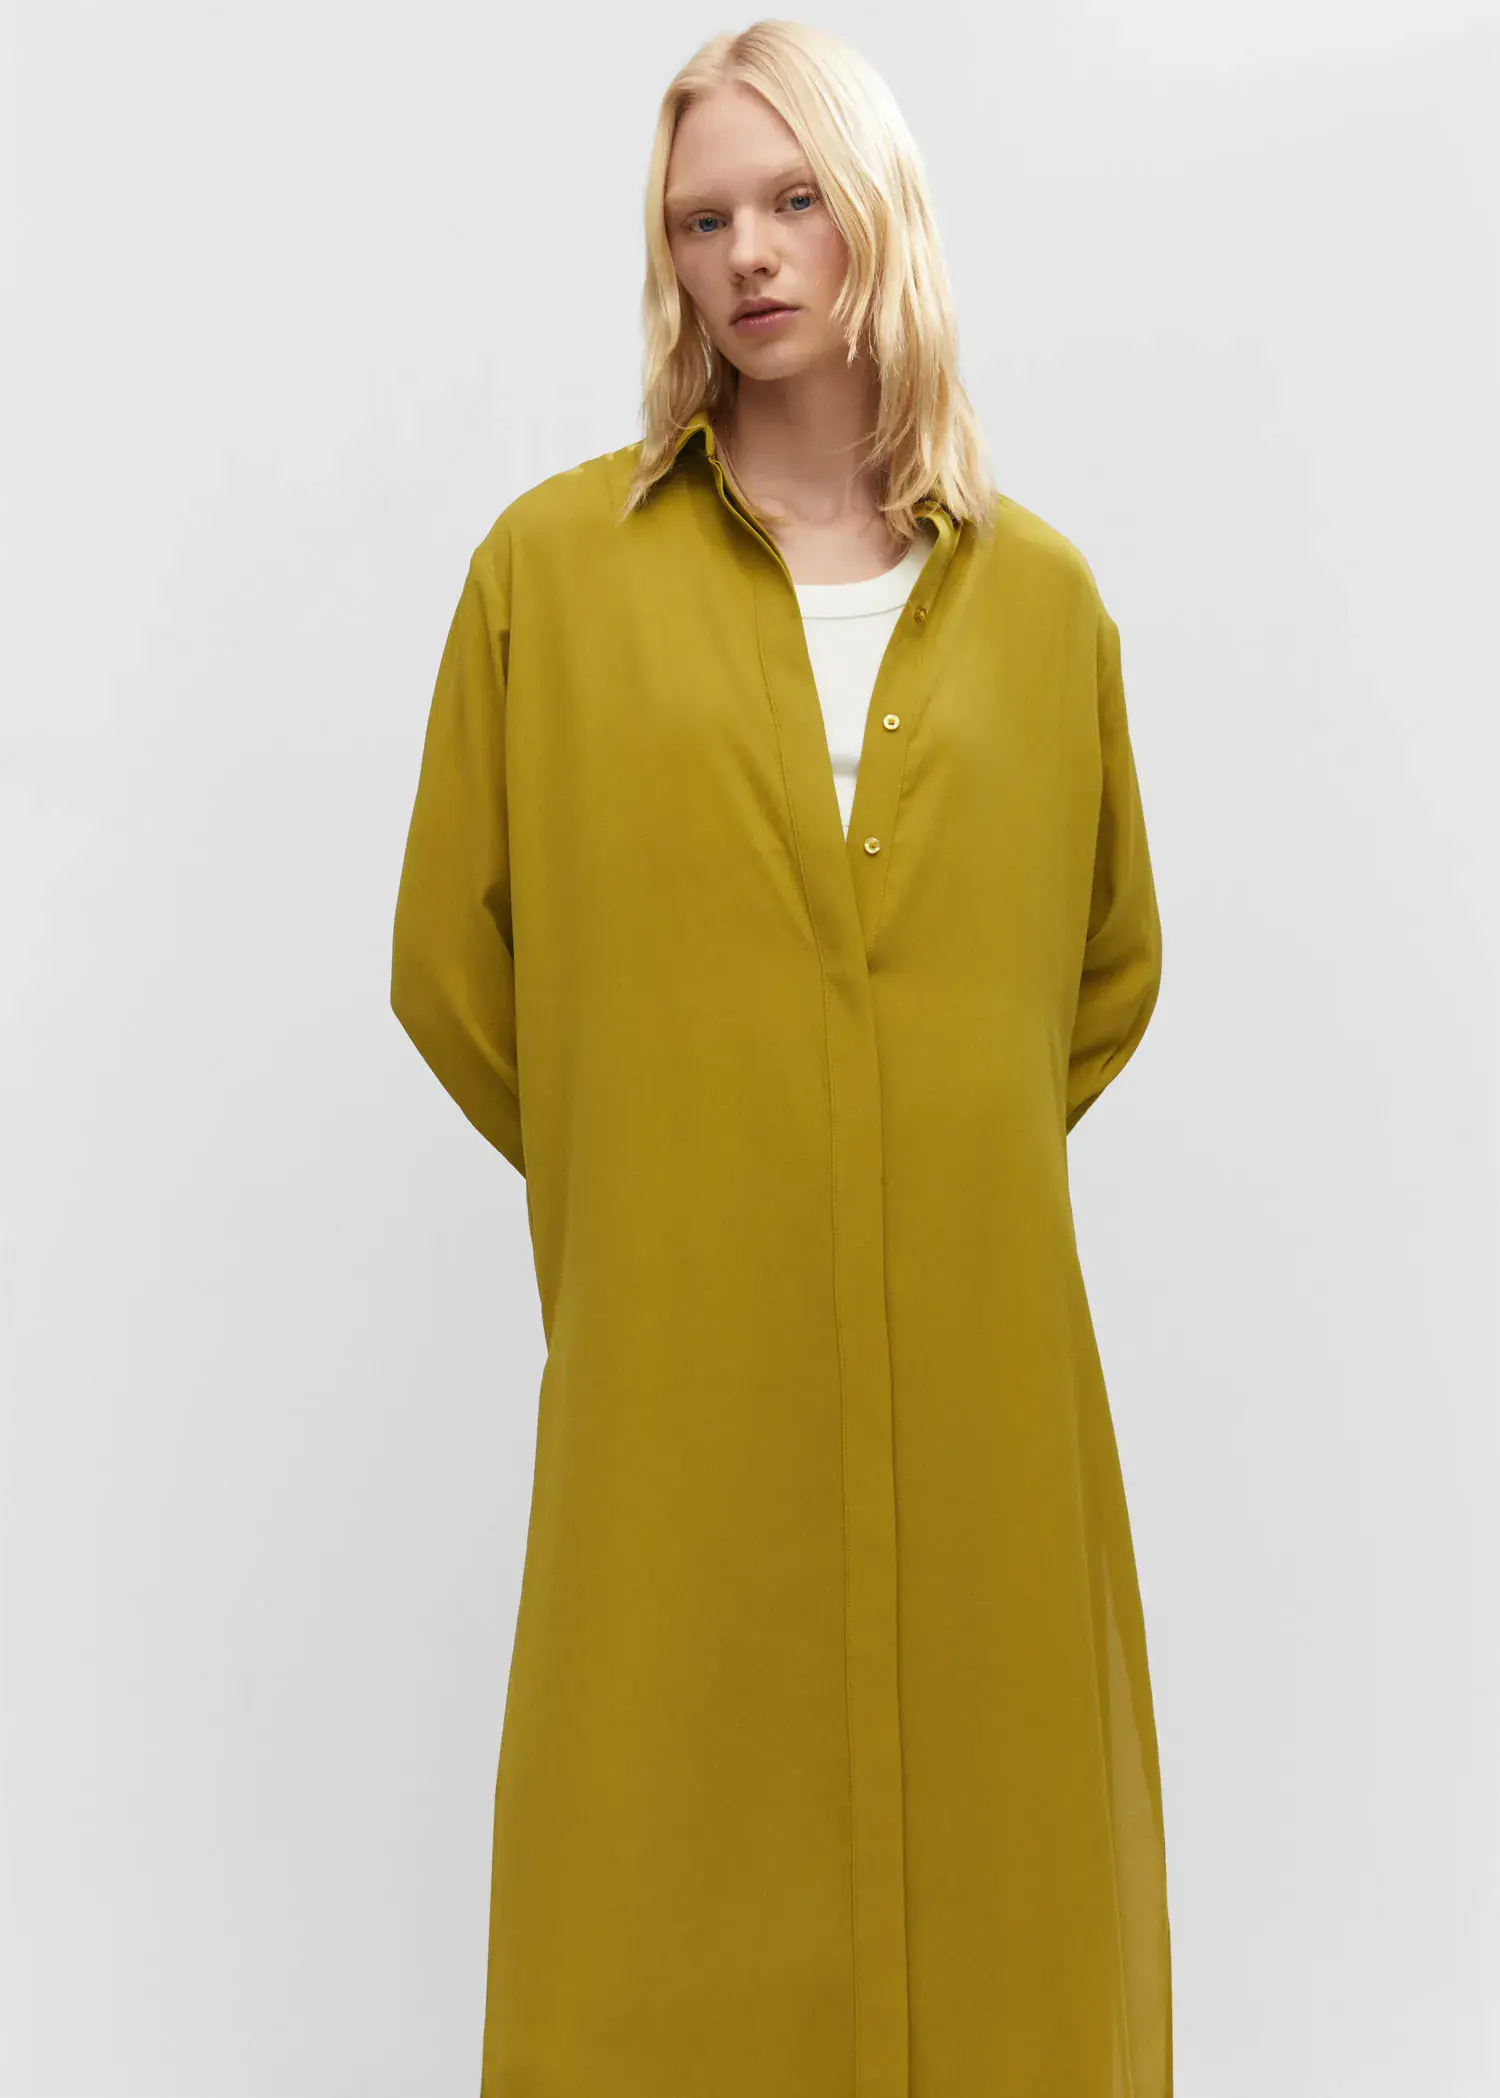 Mango Shirt dress with slits. a woman wearing a yellow dress standing in front of a white wall. 